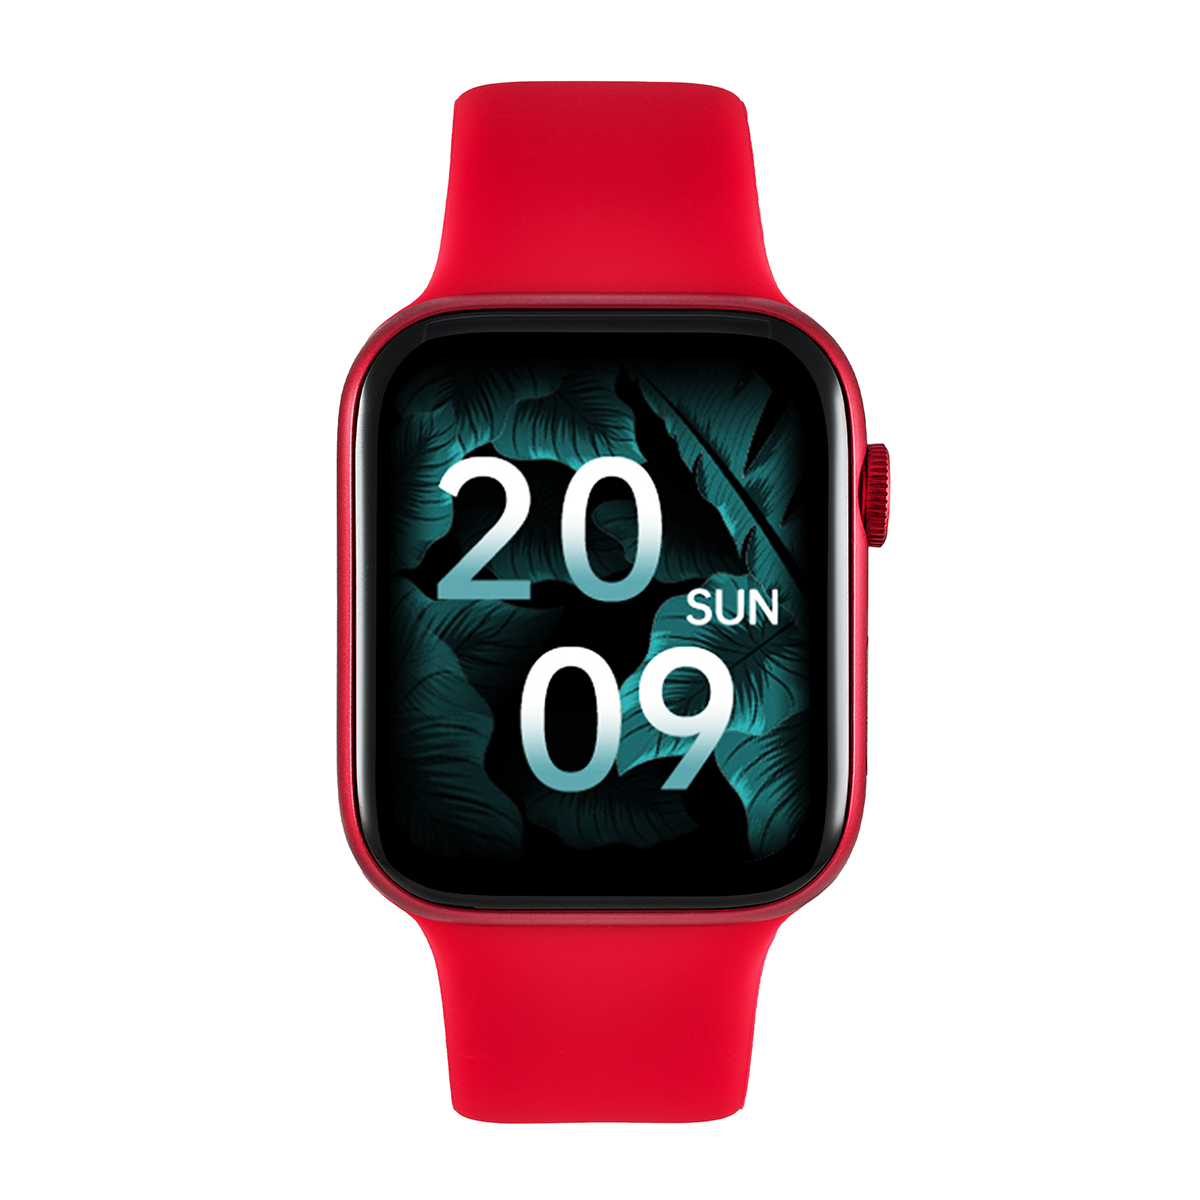 WATCHMARK Wi12 Silizium, Smartwatch Rote Kunststoff Rot